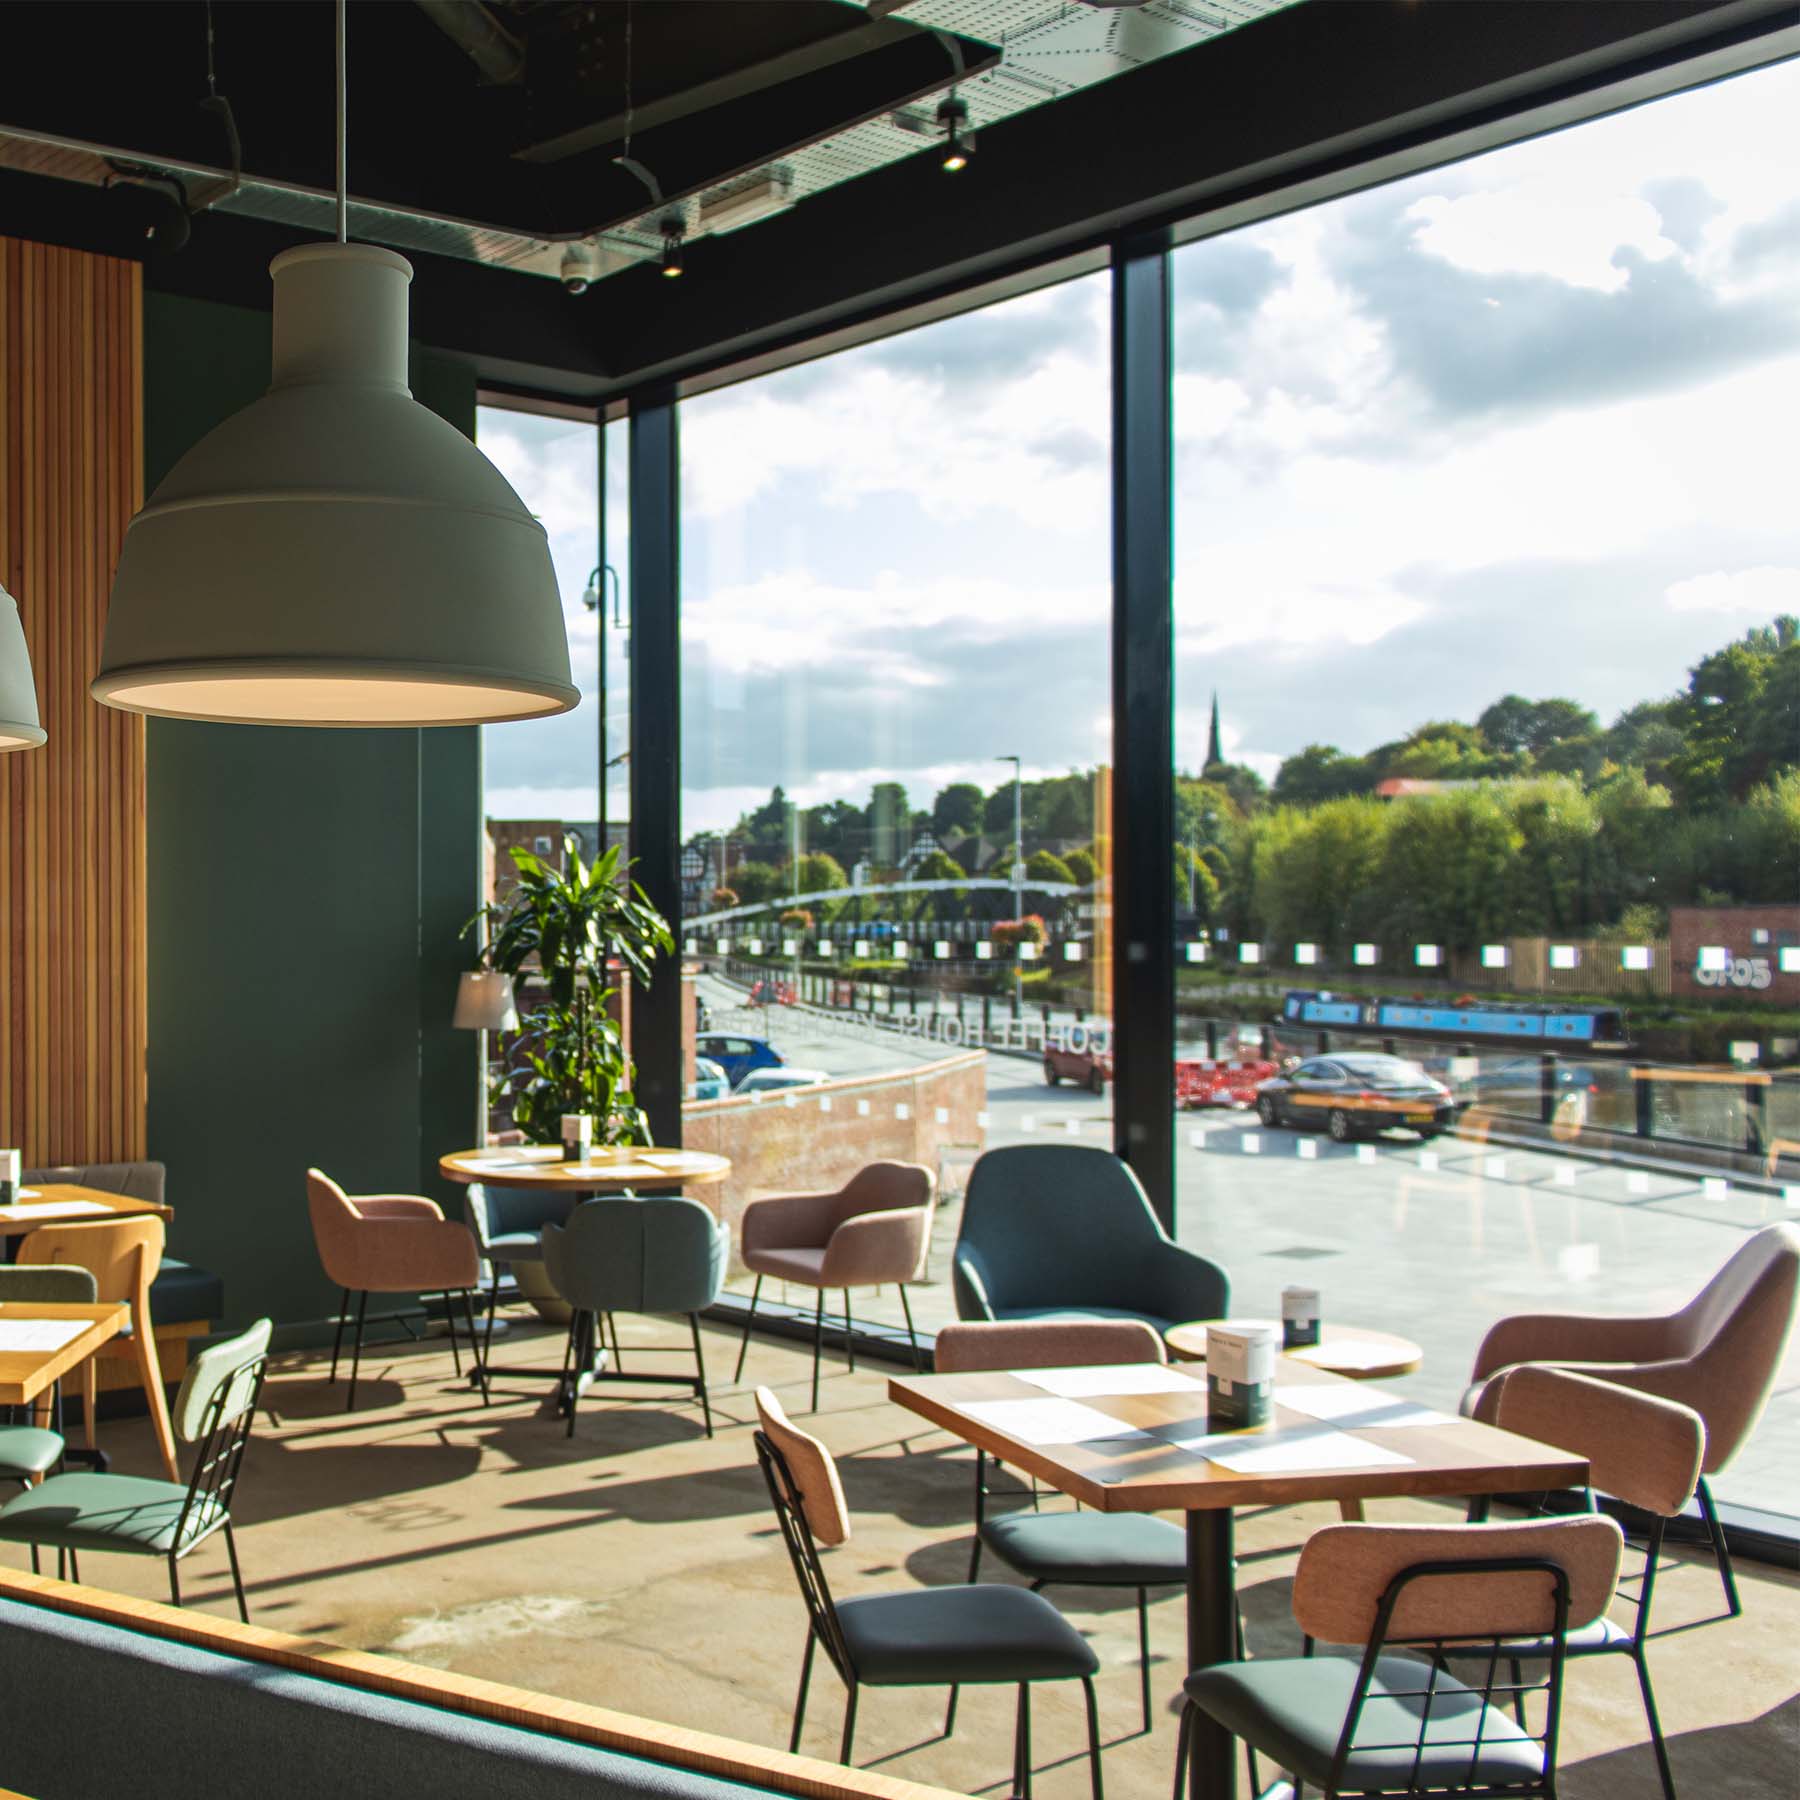 BEAR Northwich overlooking the river. Join us for brunch with a view!